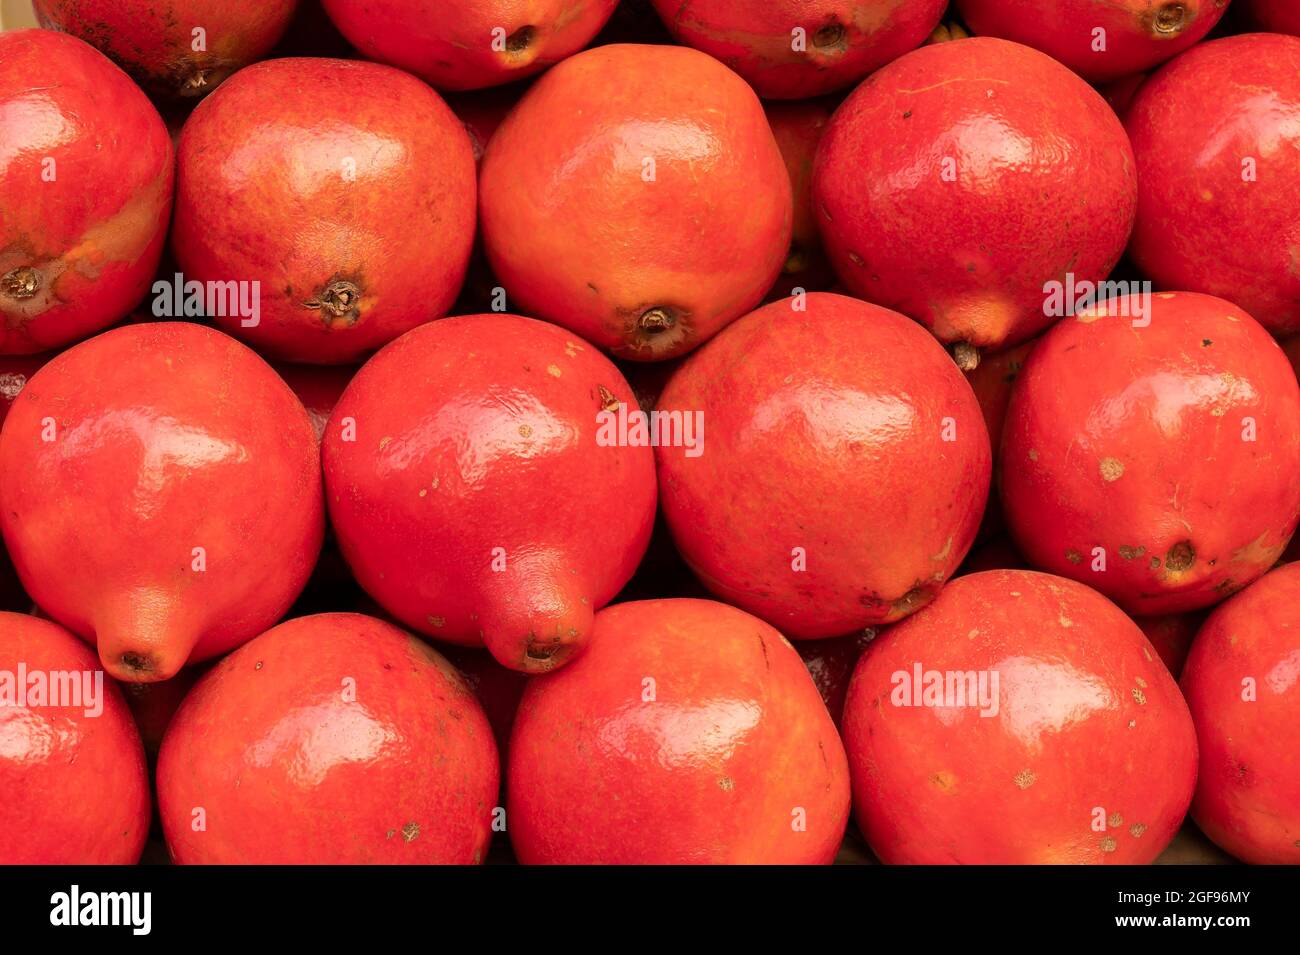 Fruits of Pomegranate, Punica granatum, family Lythraceae with juicy seeds inside. Fruits for sale at New Market area , Kolkata , West Bengal, India. Stock Photo